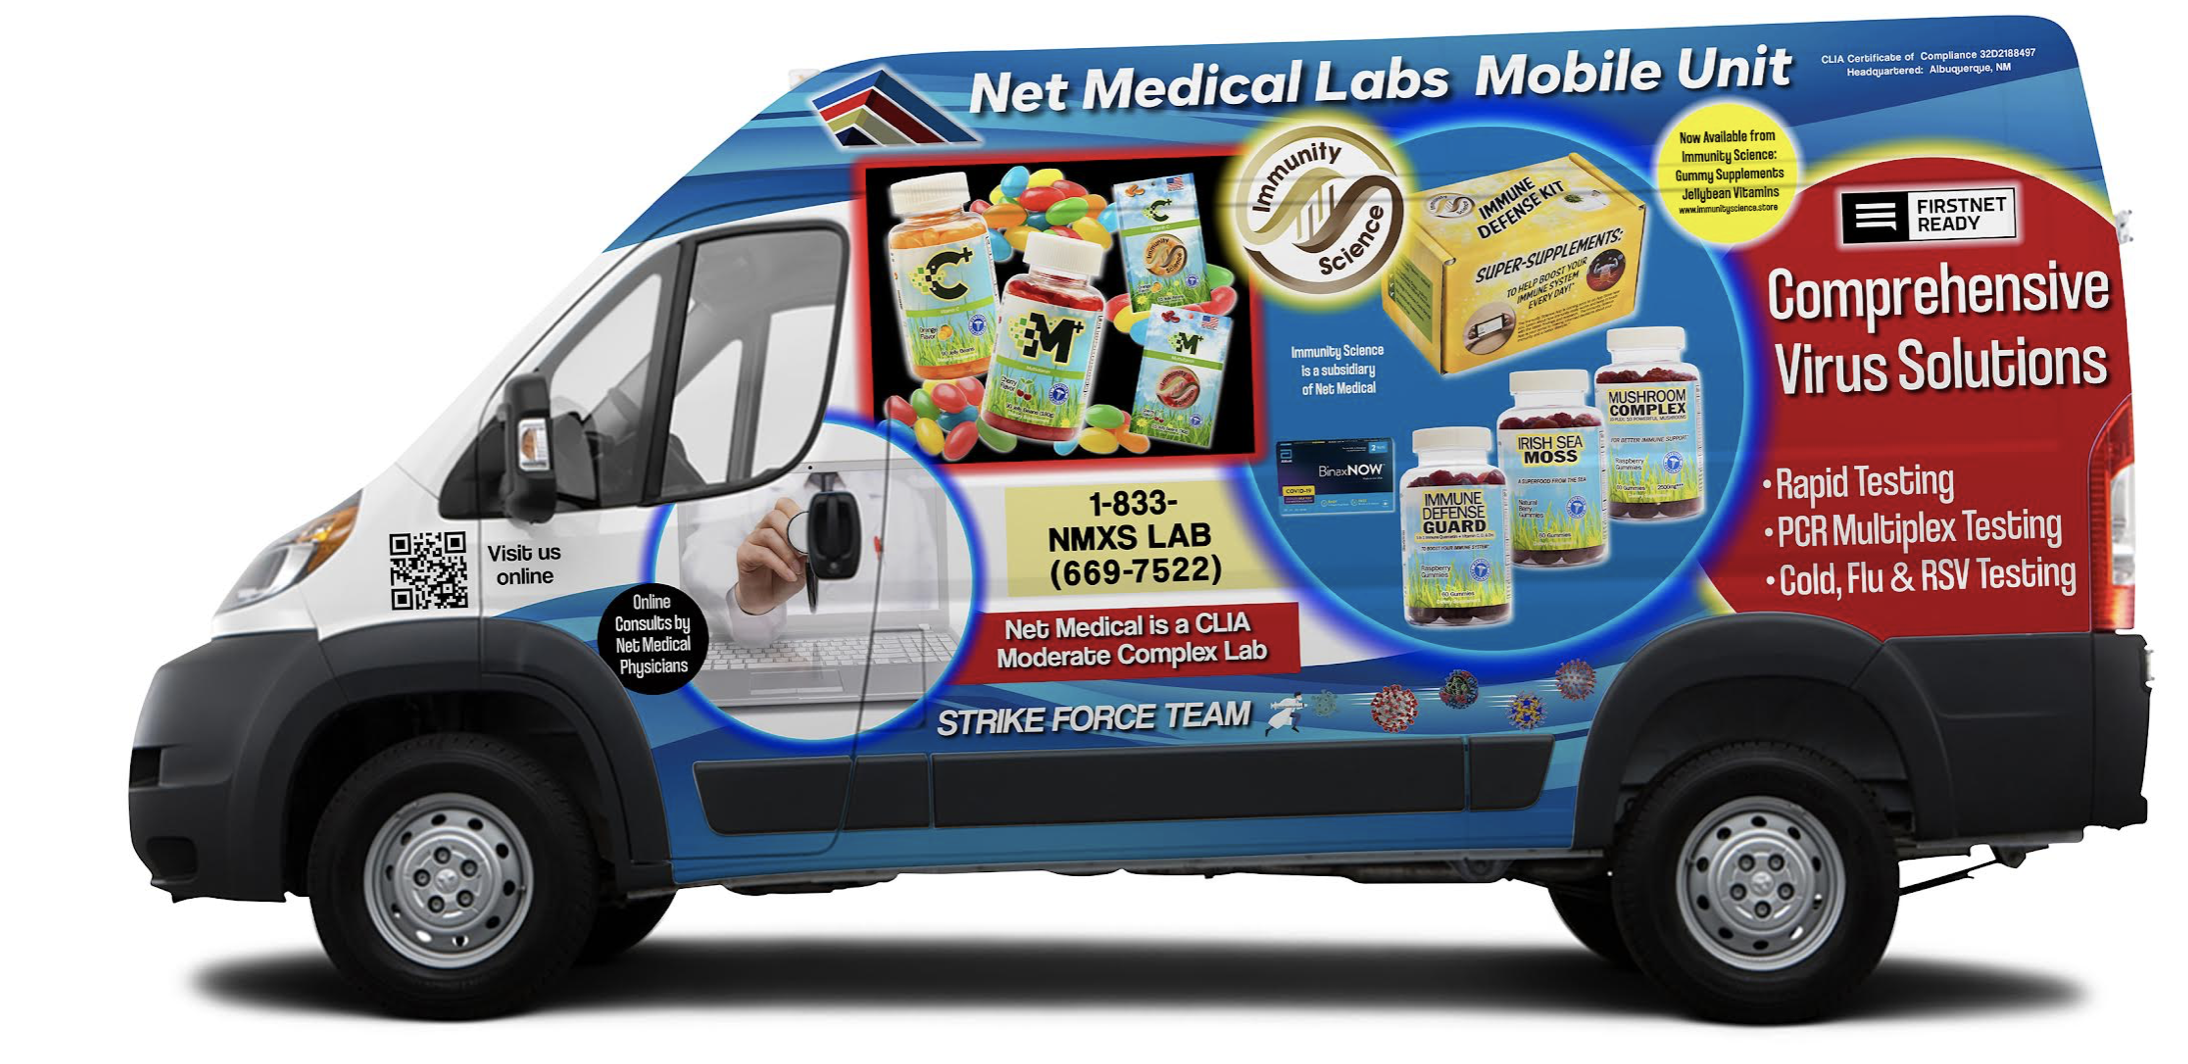 Net Medical Xpress Solutions, Inc., Thursday, November 3, 2022, Press release picture